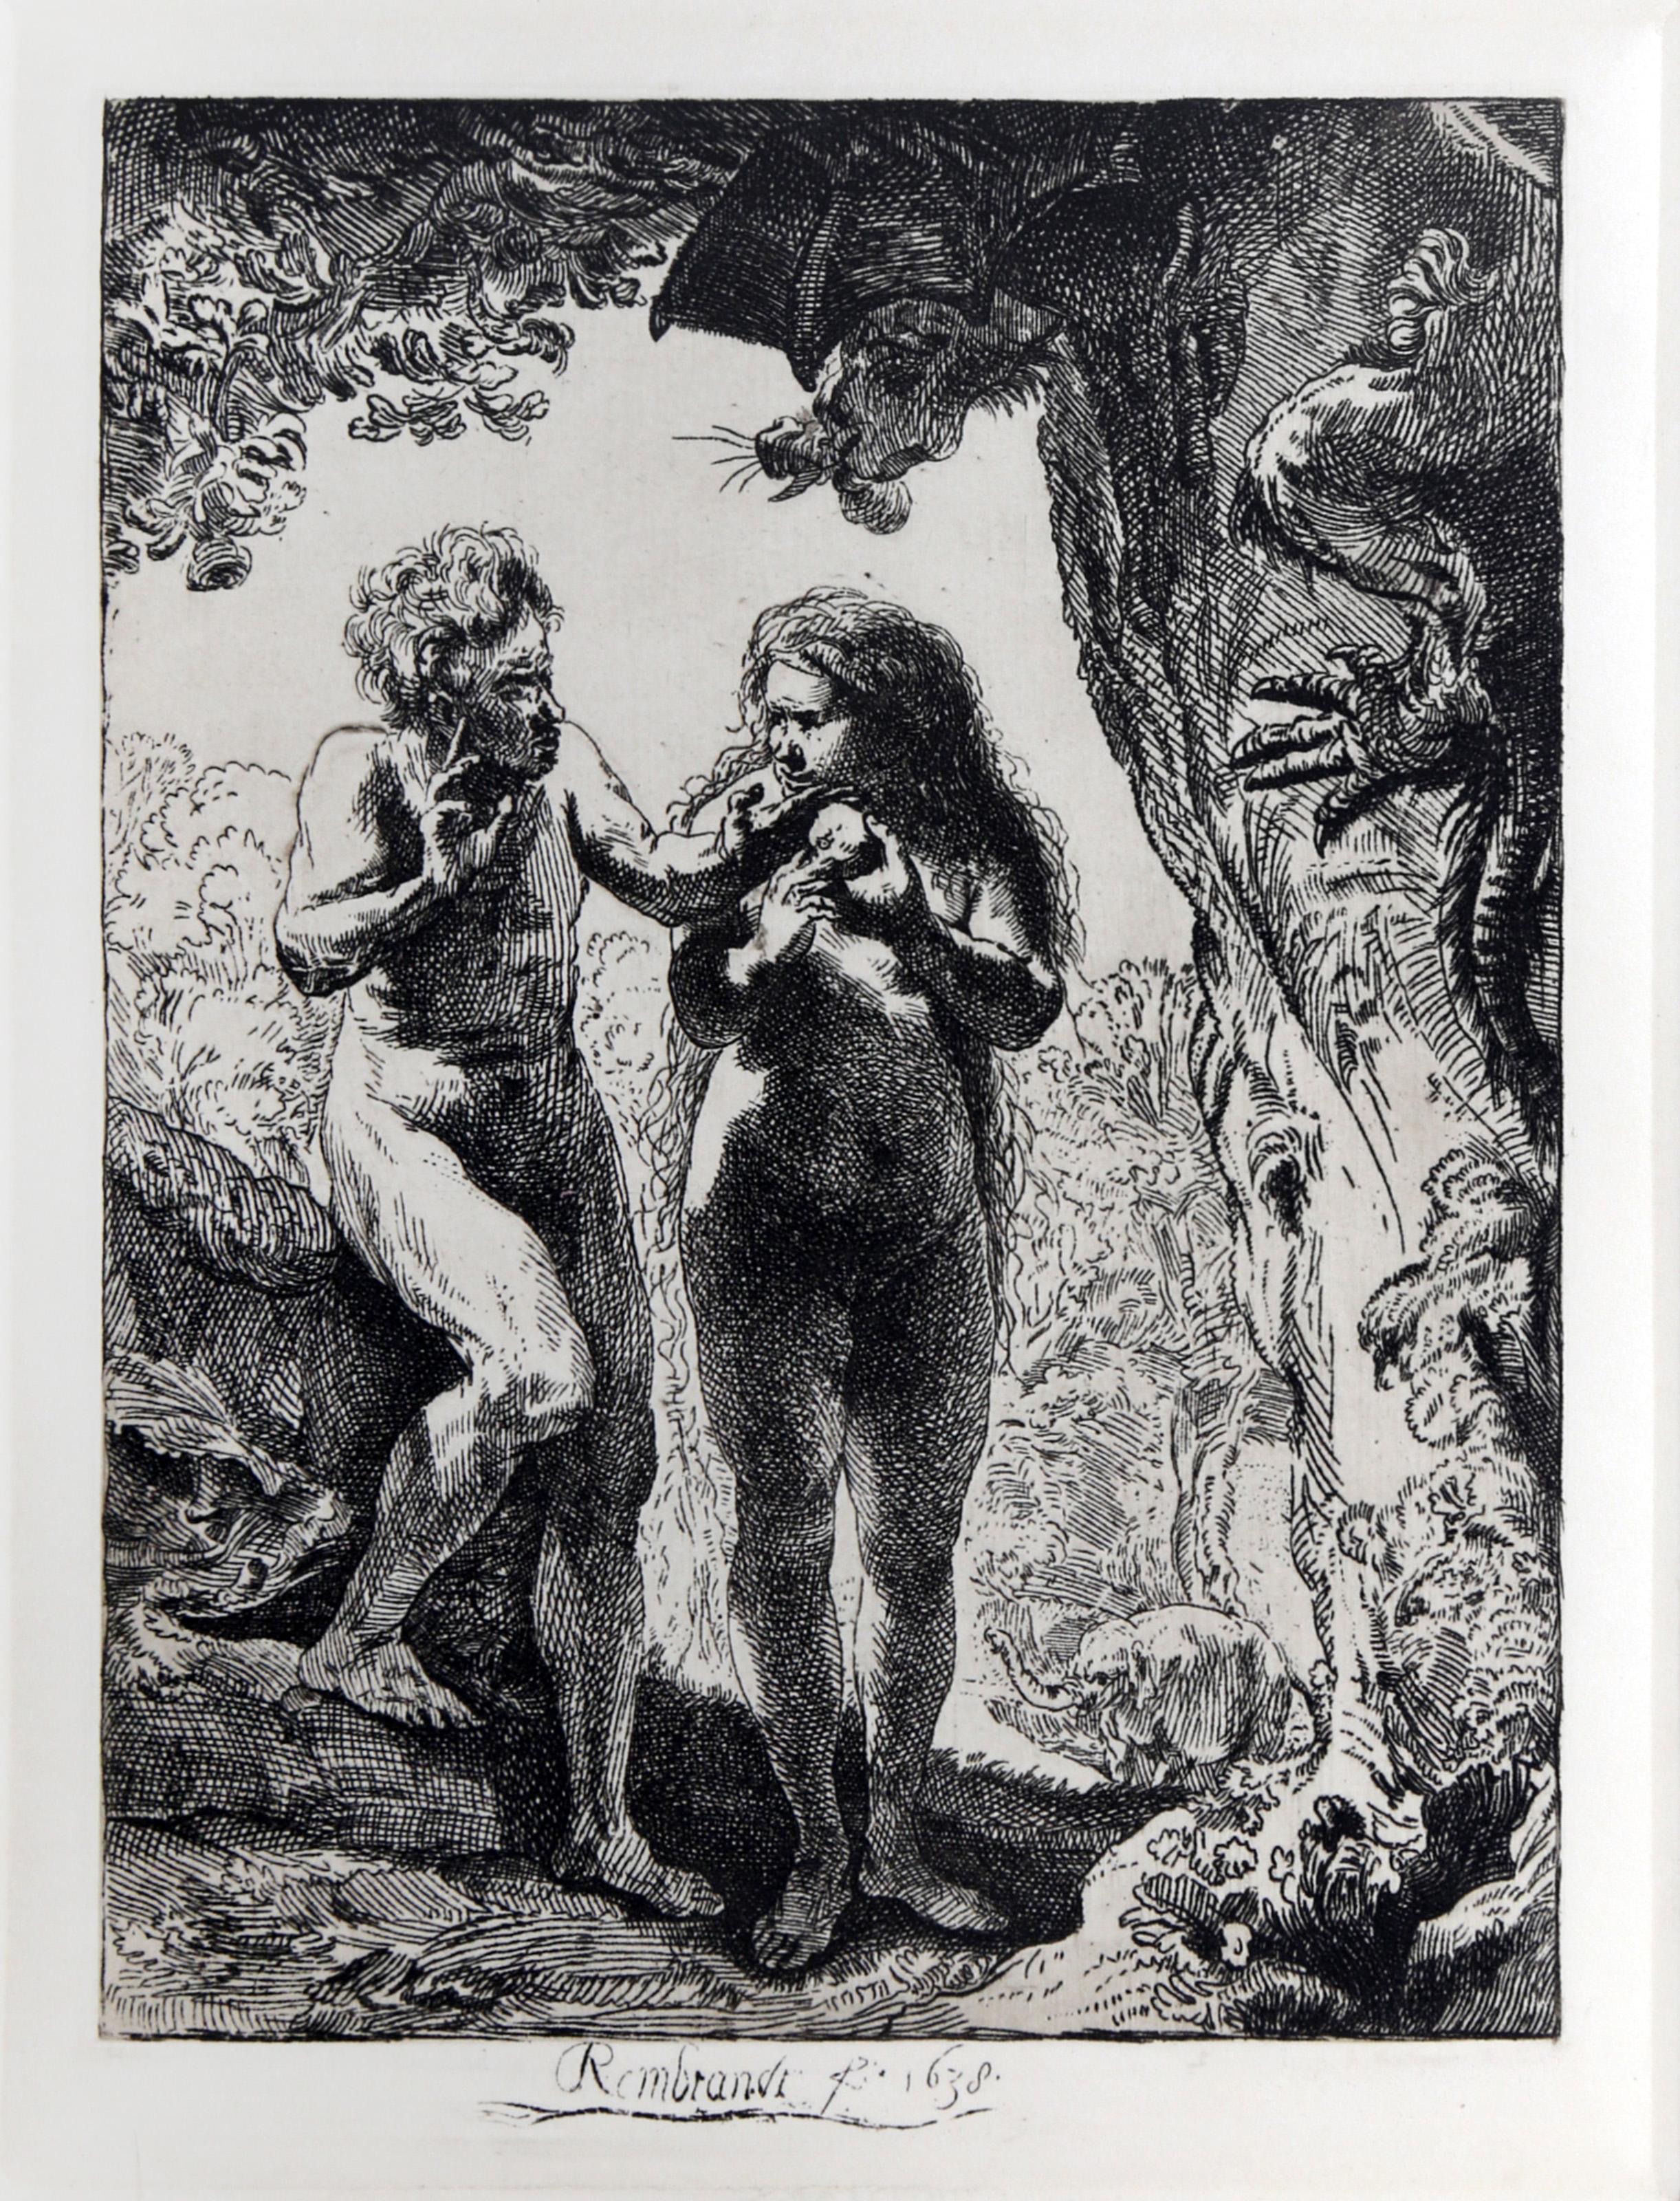  Rembrandt van Rijn, After by Amand Durand, Dutch (1606 - 1669) - Adam and Eve (B28), Year: Of Original 1638, Medium: Etching, Image Size: 6.5 x 4.5 inches, Size: 14  x 11 in. (35.56  x 27.94 cm), Printer: Amand Durand, Reference: B28 in "The